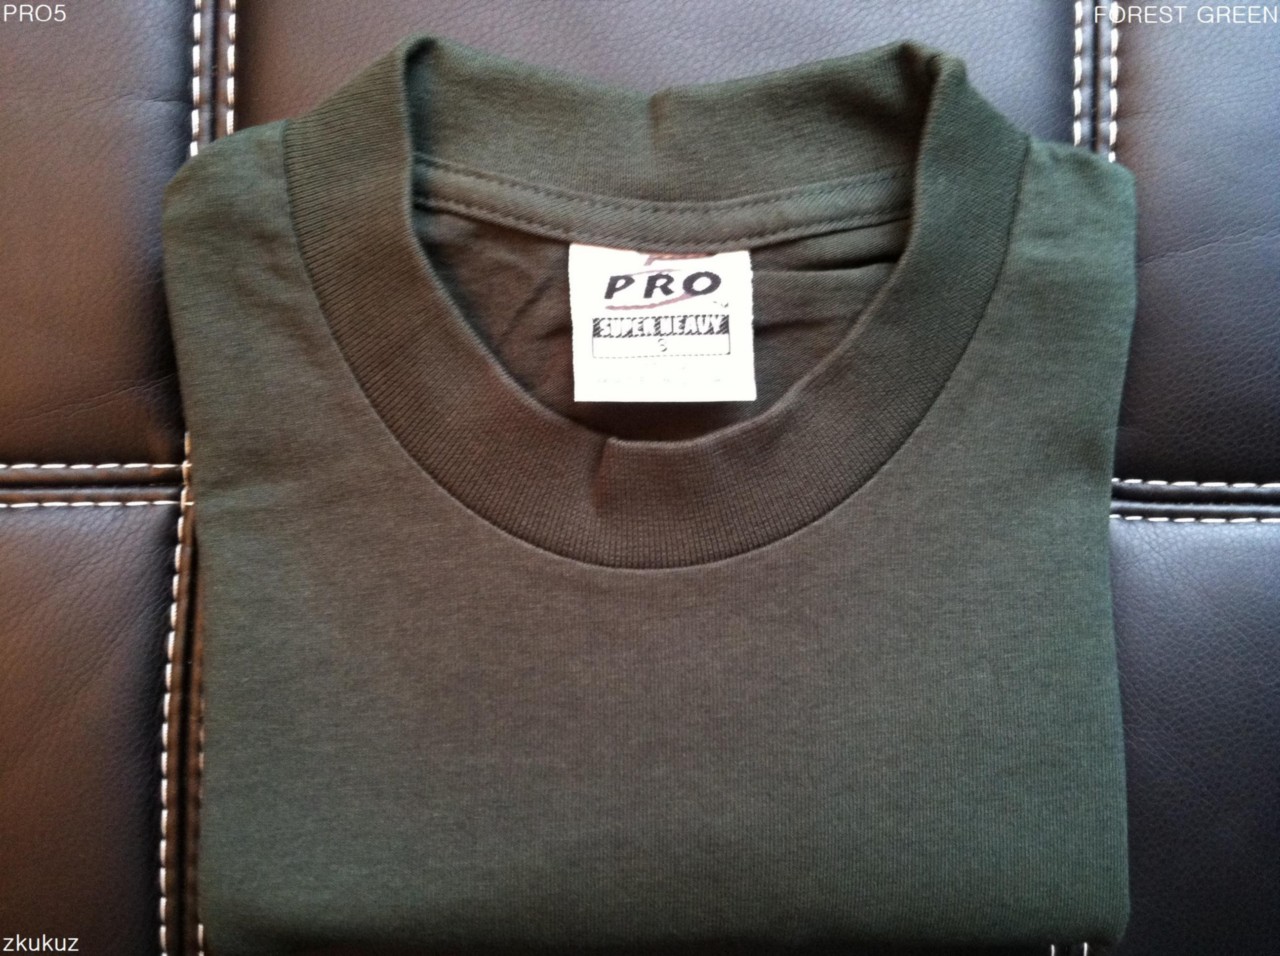 1 NEW PRO 5 PRO5 T-SHIRT SUPER HEAVY WEIGHT COLOR BLANK PLAIN TEE LT ...